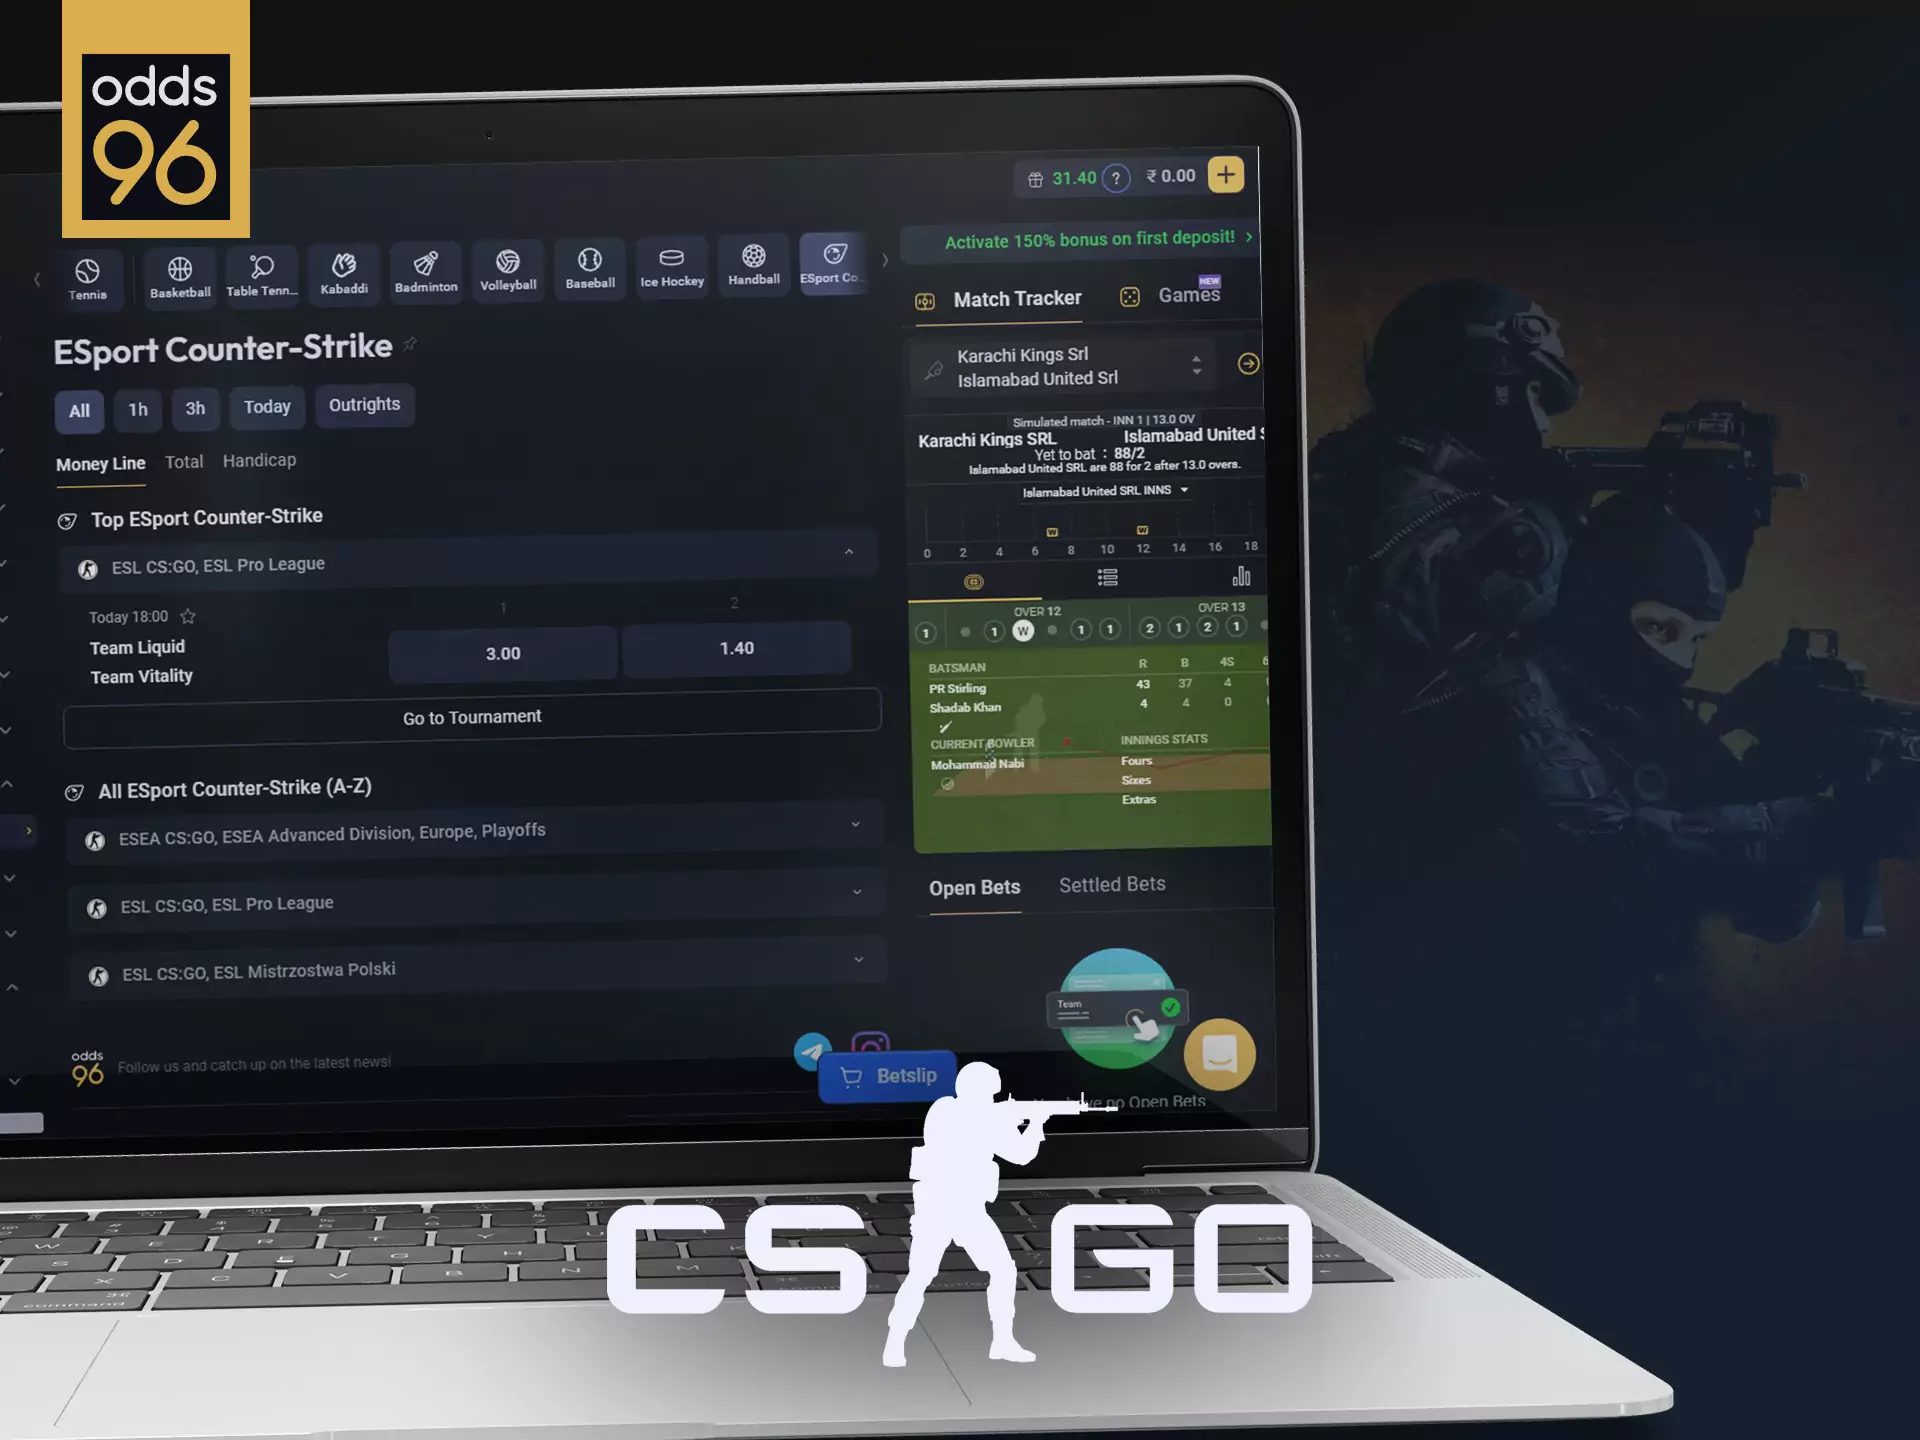 Place bets in Odds96 on CS:GO.